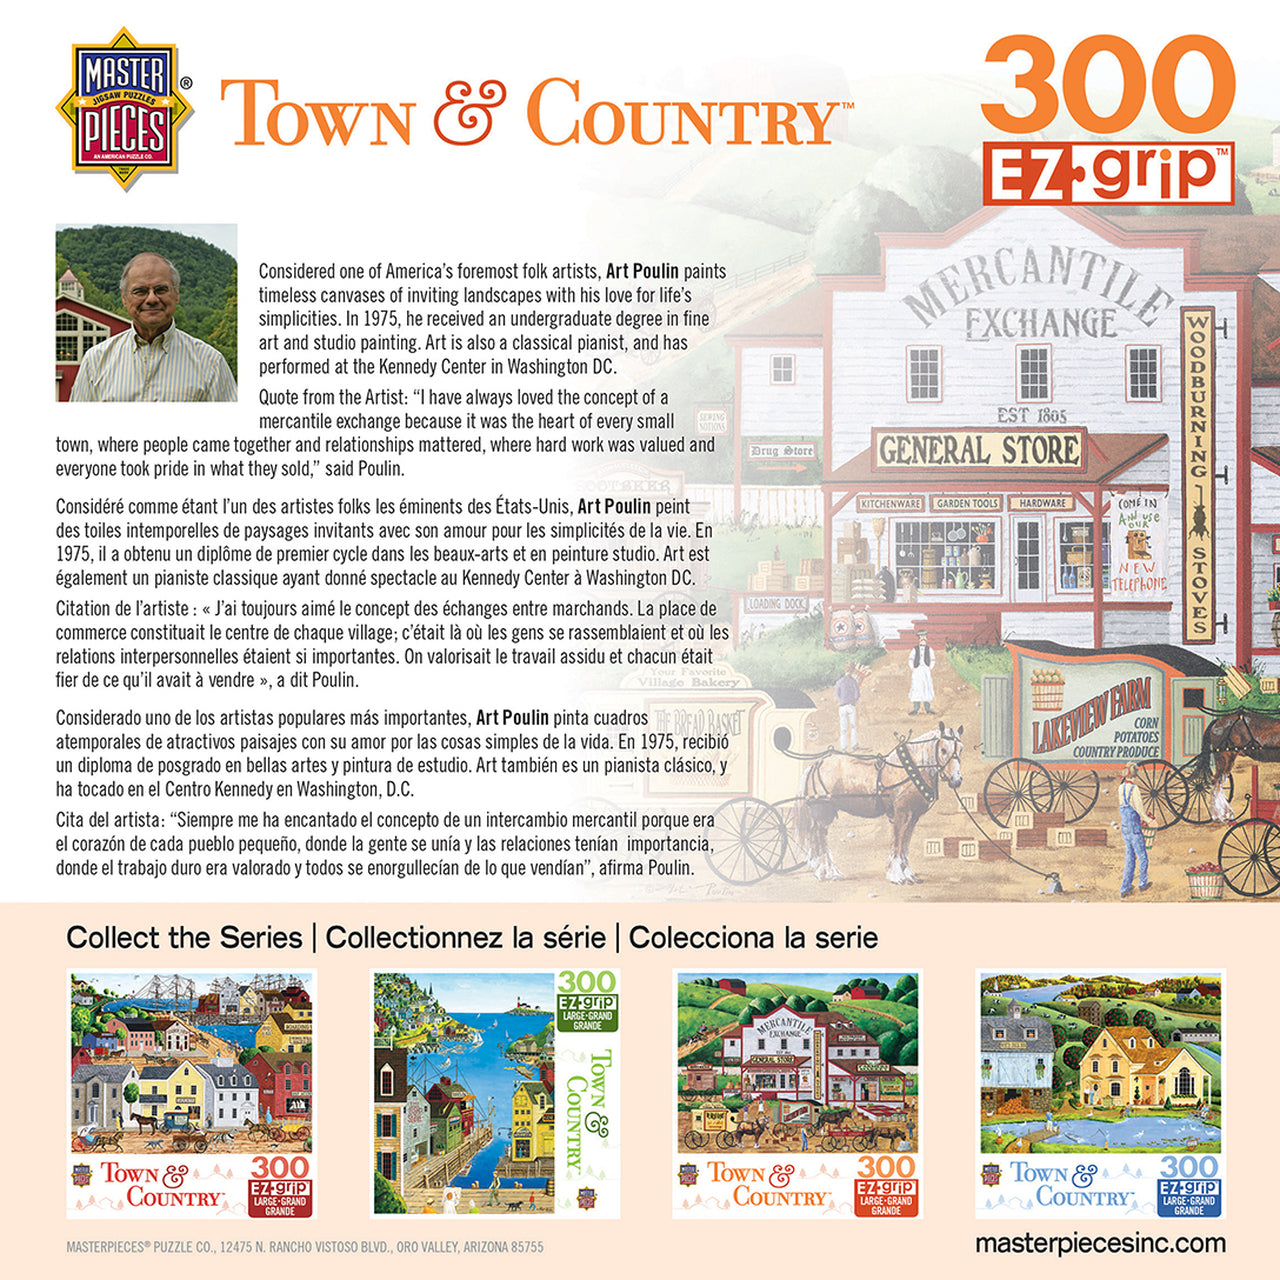 Town & Country Morning Deliveries - Large 300 Piece EZGrip Jigsaw Puzzle by Masterpieces